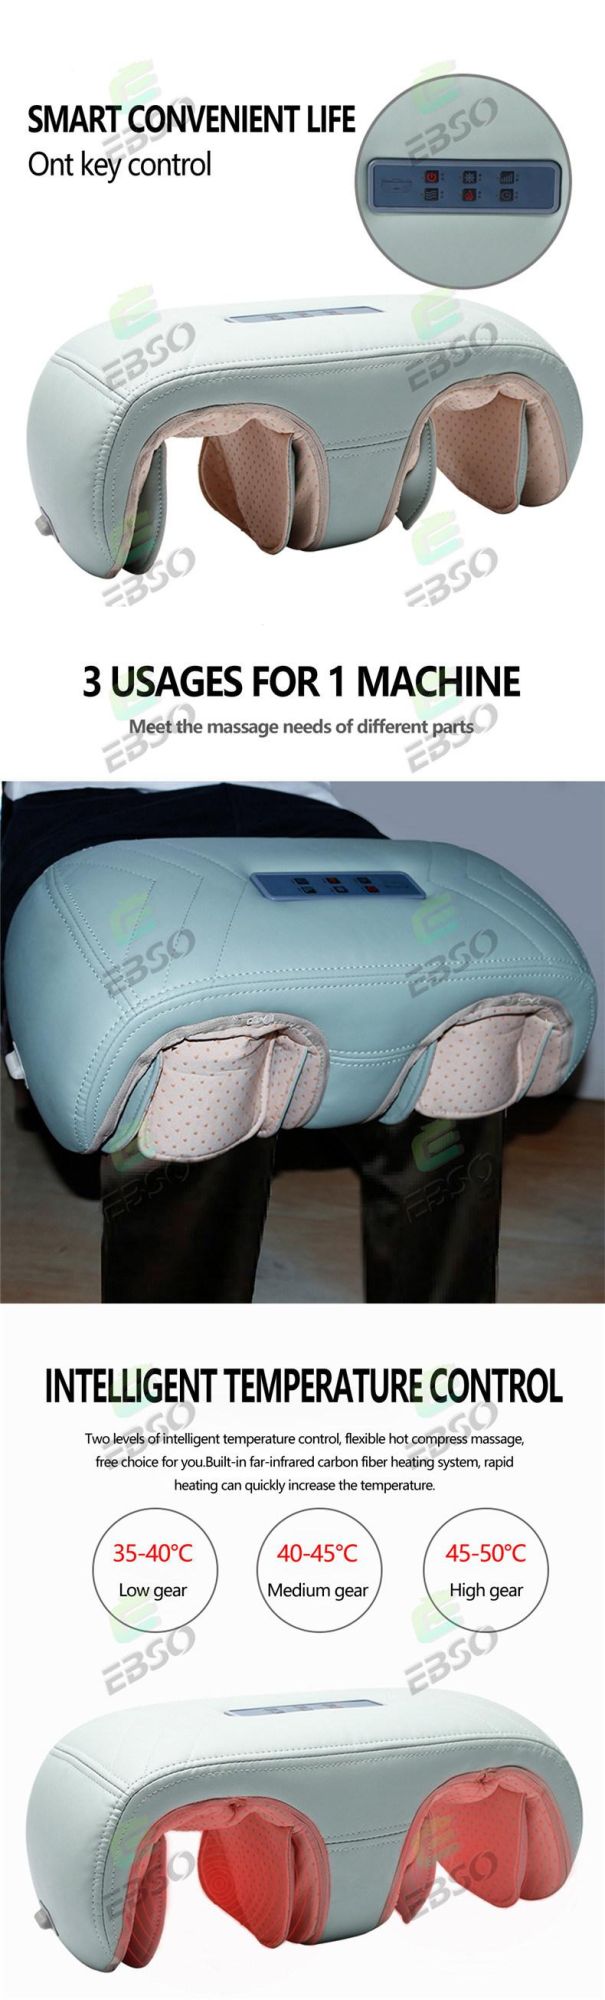 Heat Therapy Knee Physiotherapy Massager, Heated and Vibration Massage Knee and Joint Pain Relief Massager, Gift for Mom Dad